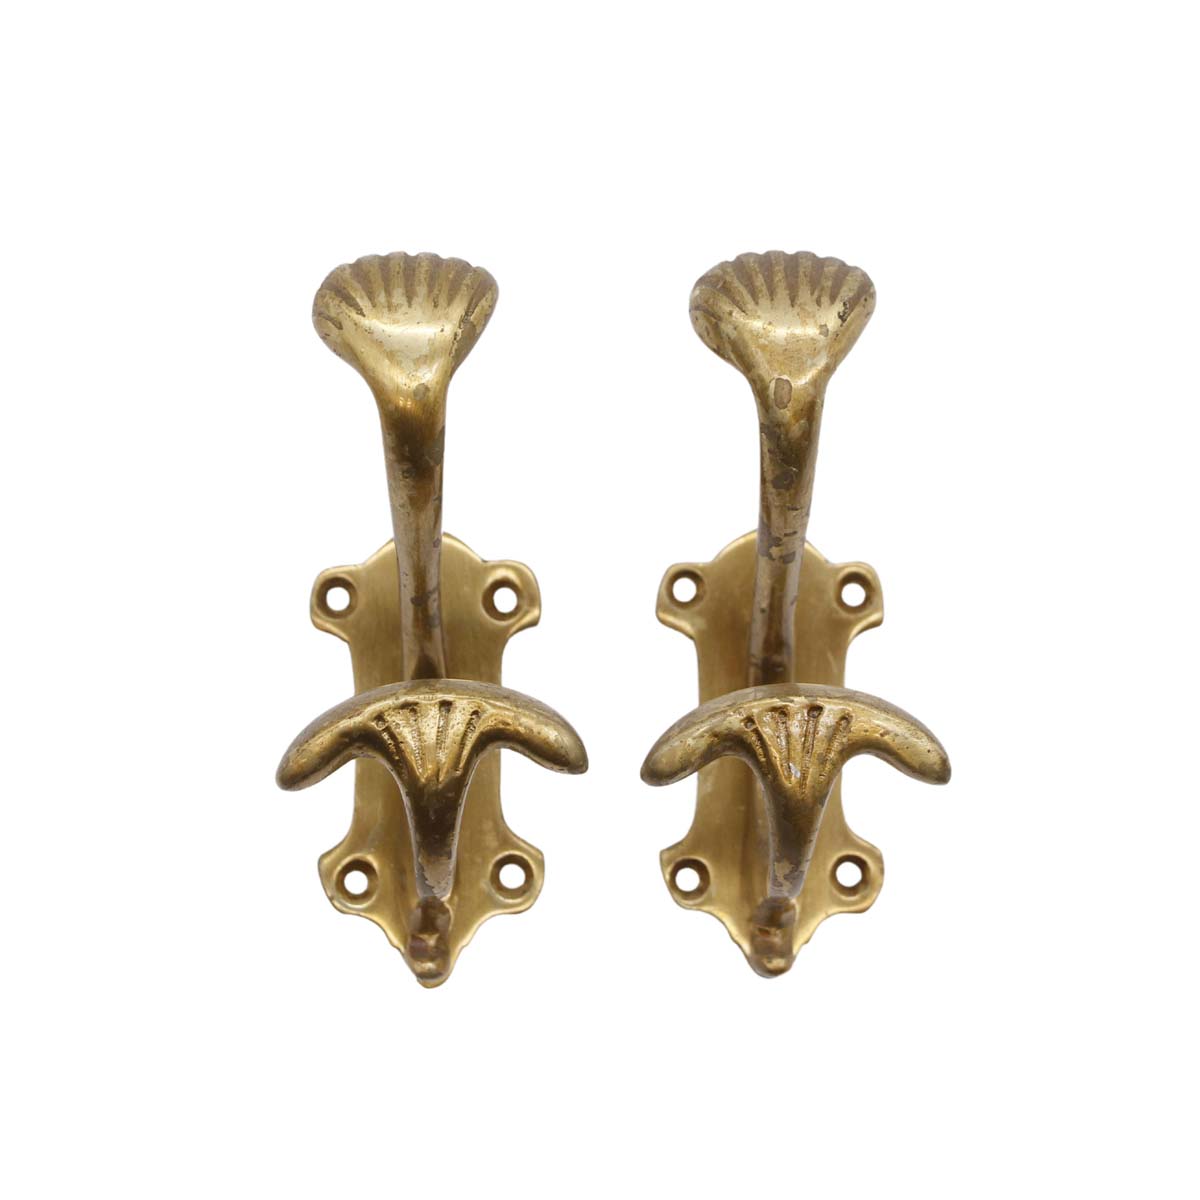 Pair of Art Deco Solid Brass Double Arm Coat & Hat Wall Hooks